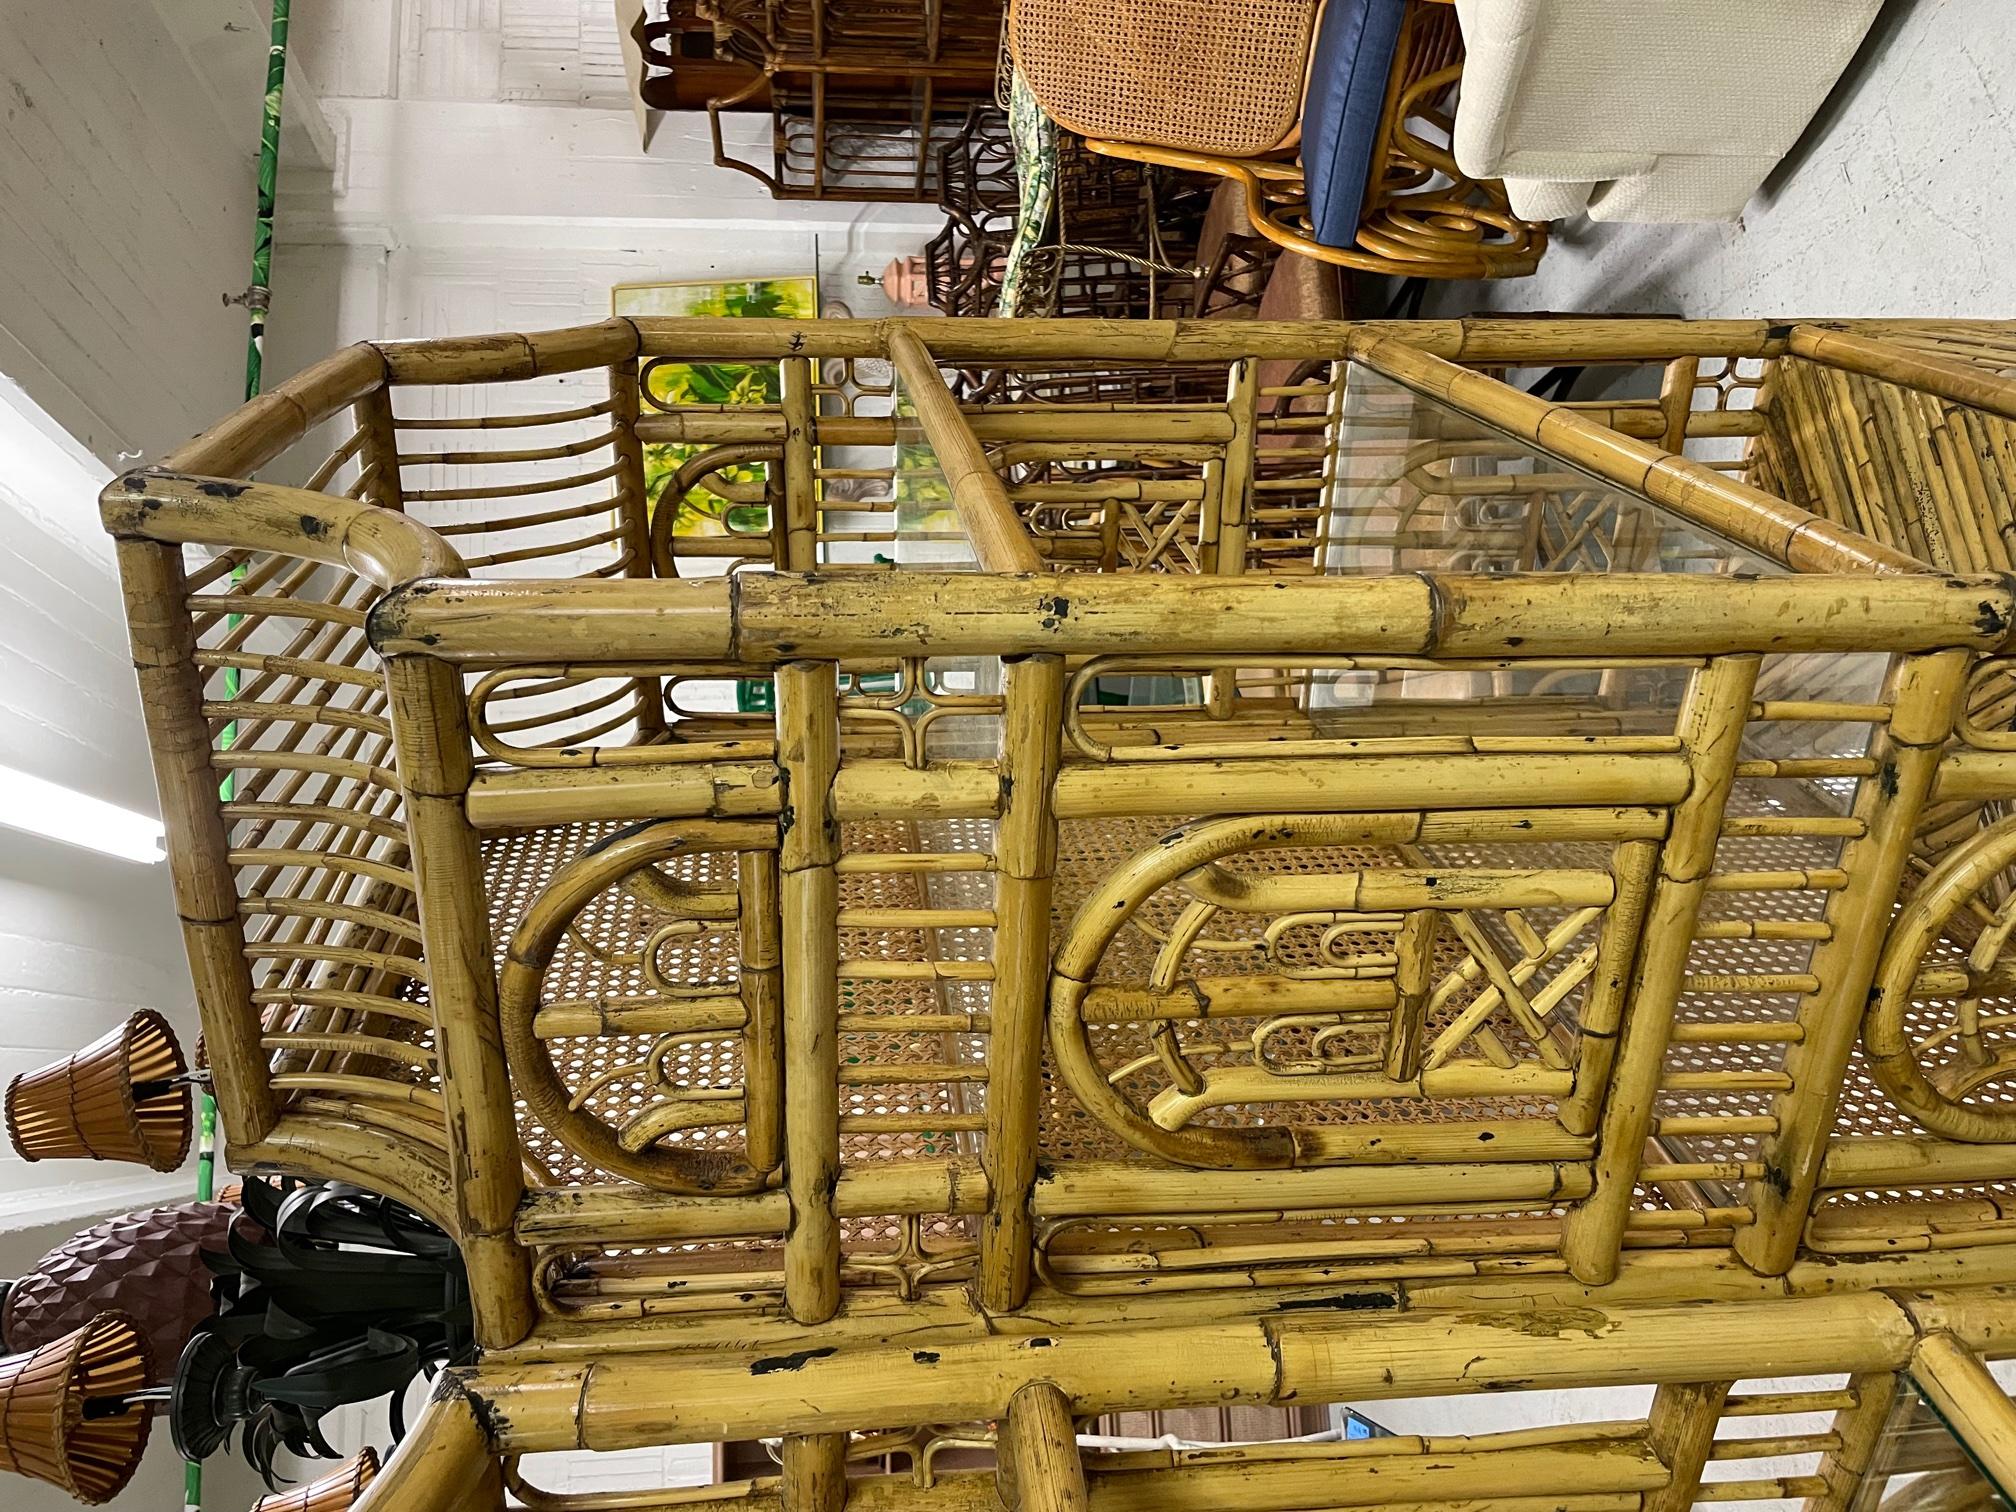 Pair of large Asian chinoiserie style etageres feature full rattan construction with intricate Chinese chippendale fretwork and double door storage. Two glass shelves above lower rattan shelf. Brass hardware. Full cane back. Very good condition with